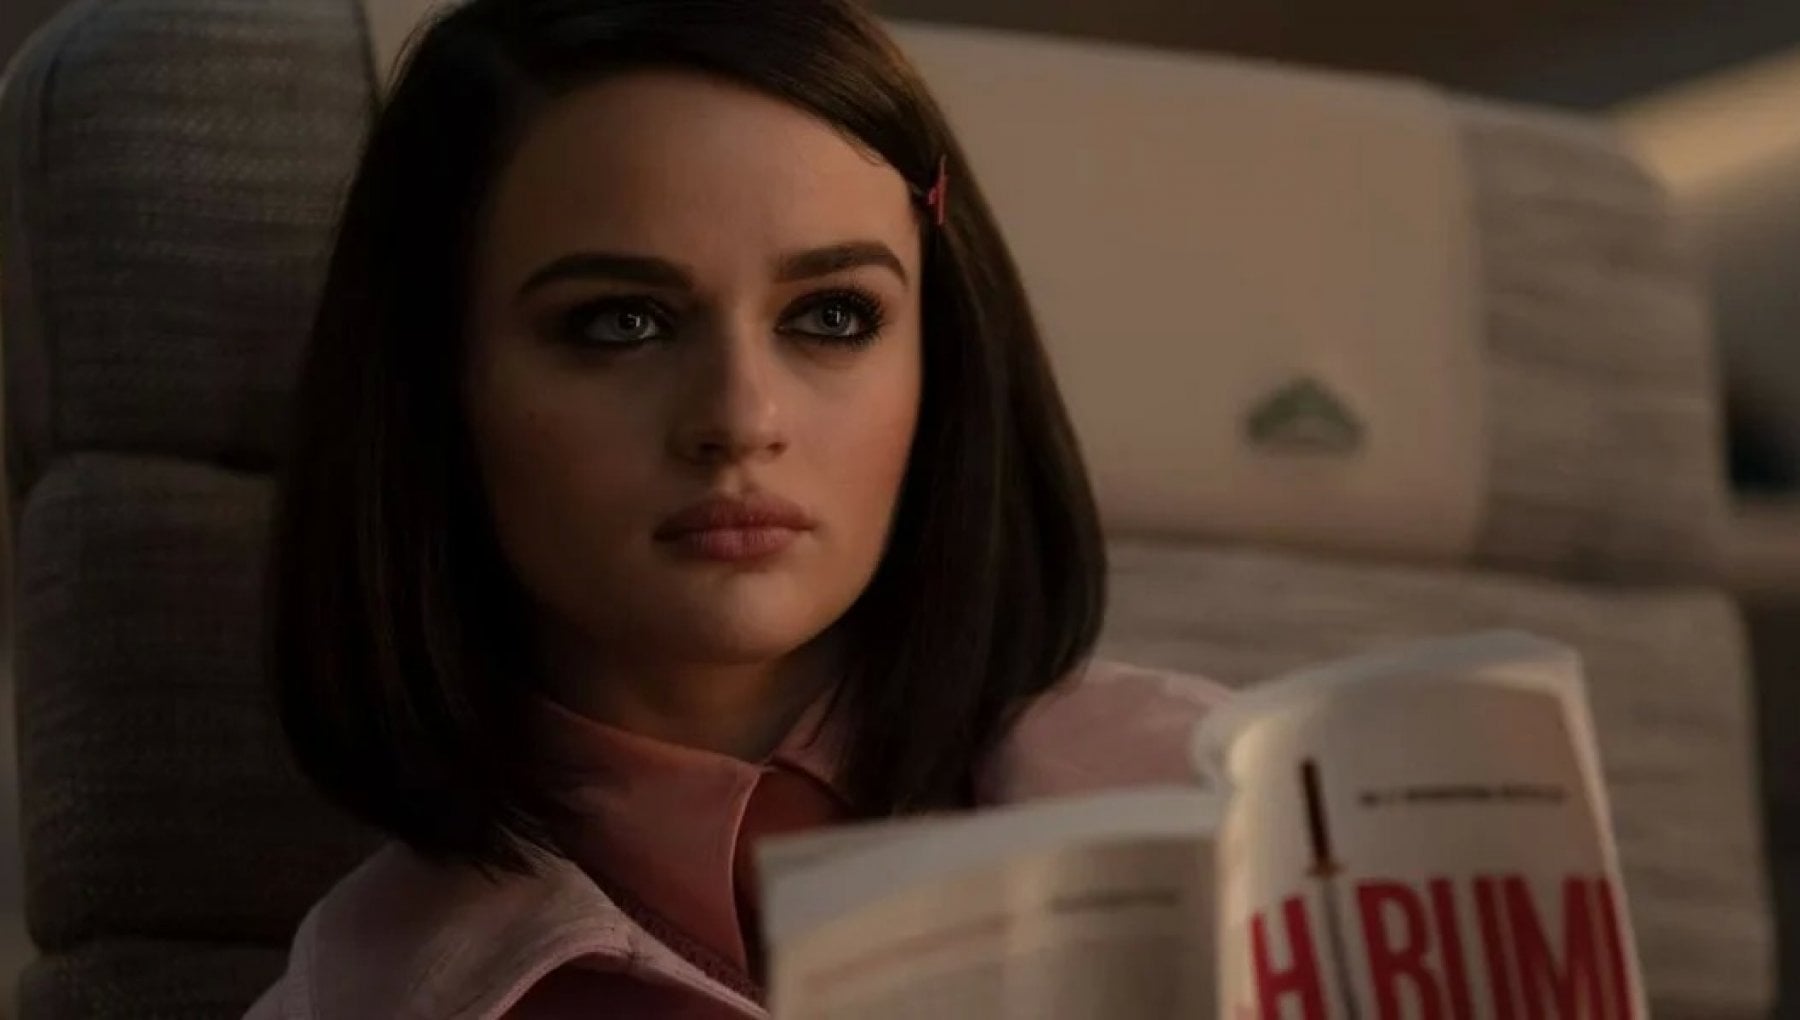 A Comprehensive List of Joey King Movies and TV Shows